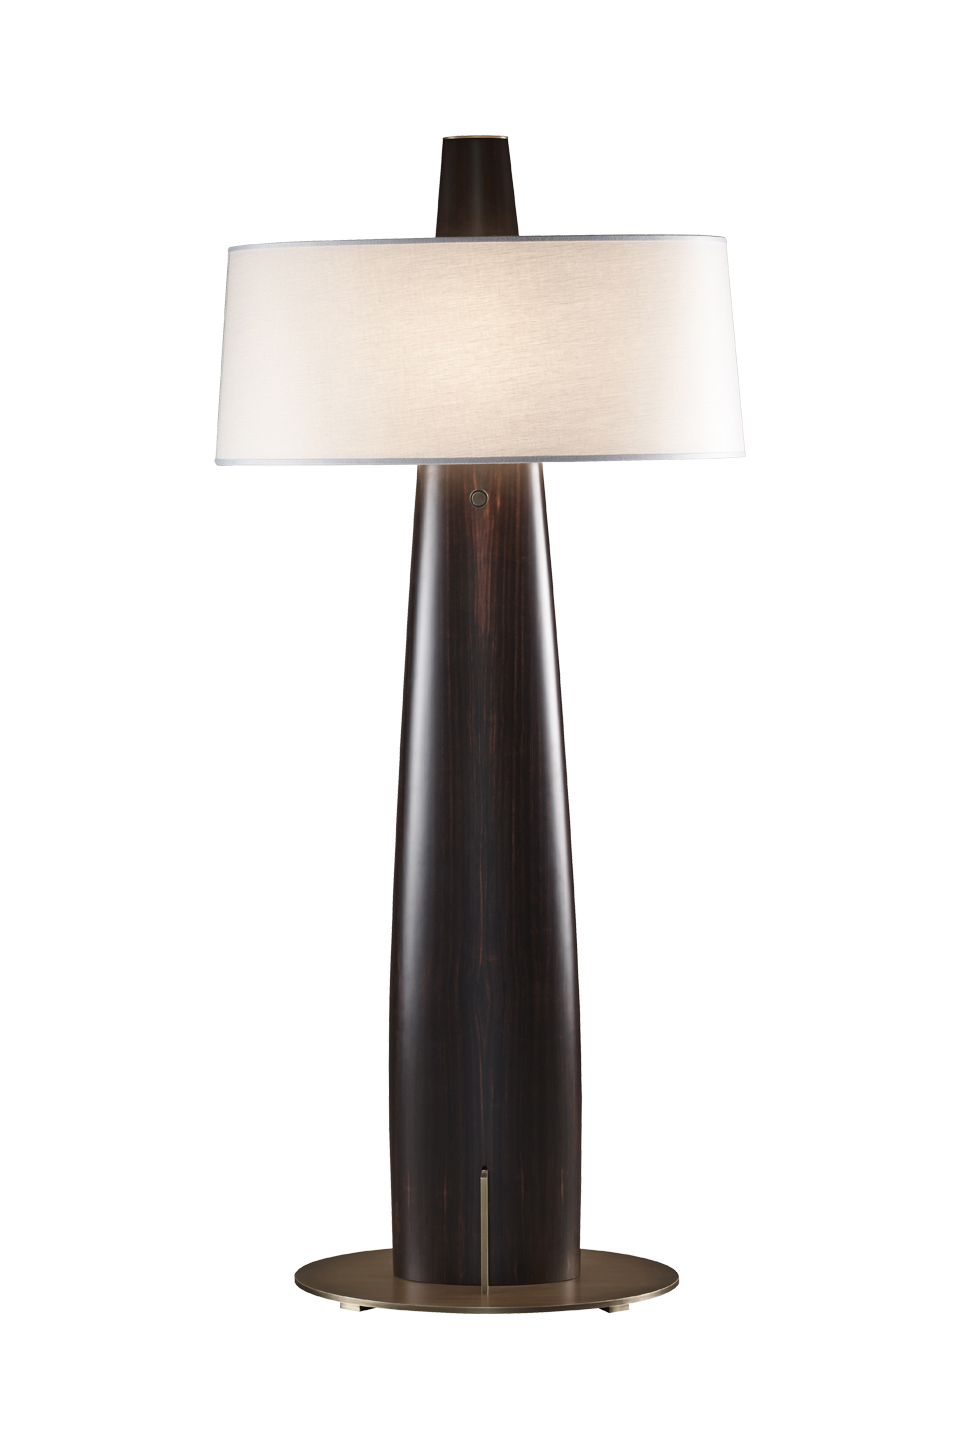 Fosca is a floor wooden LED lamp with a bronze base and a cotton, linen or hand-embroidered silk lampshade, from Promemoria's catalogue | Promemoria